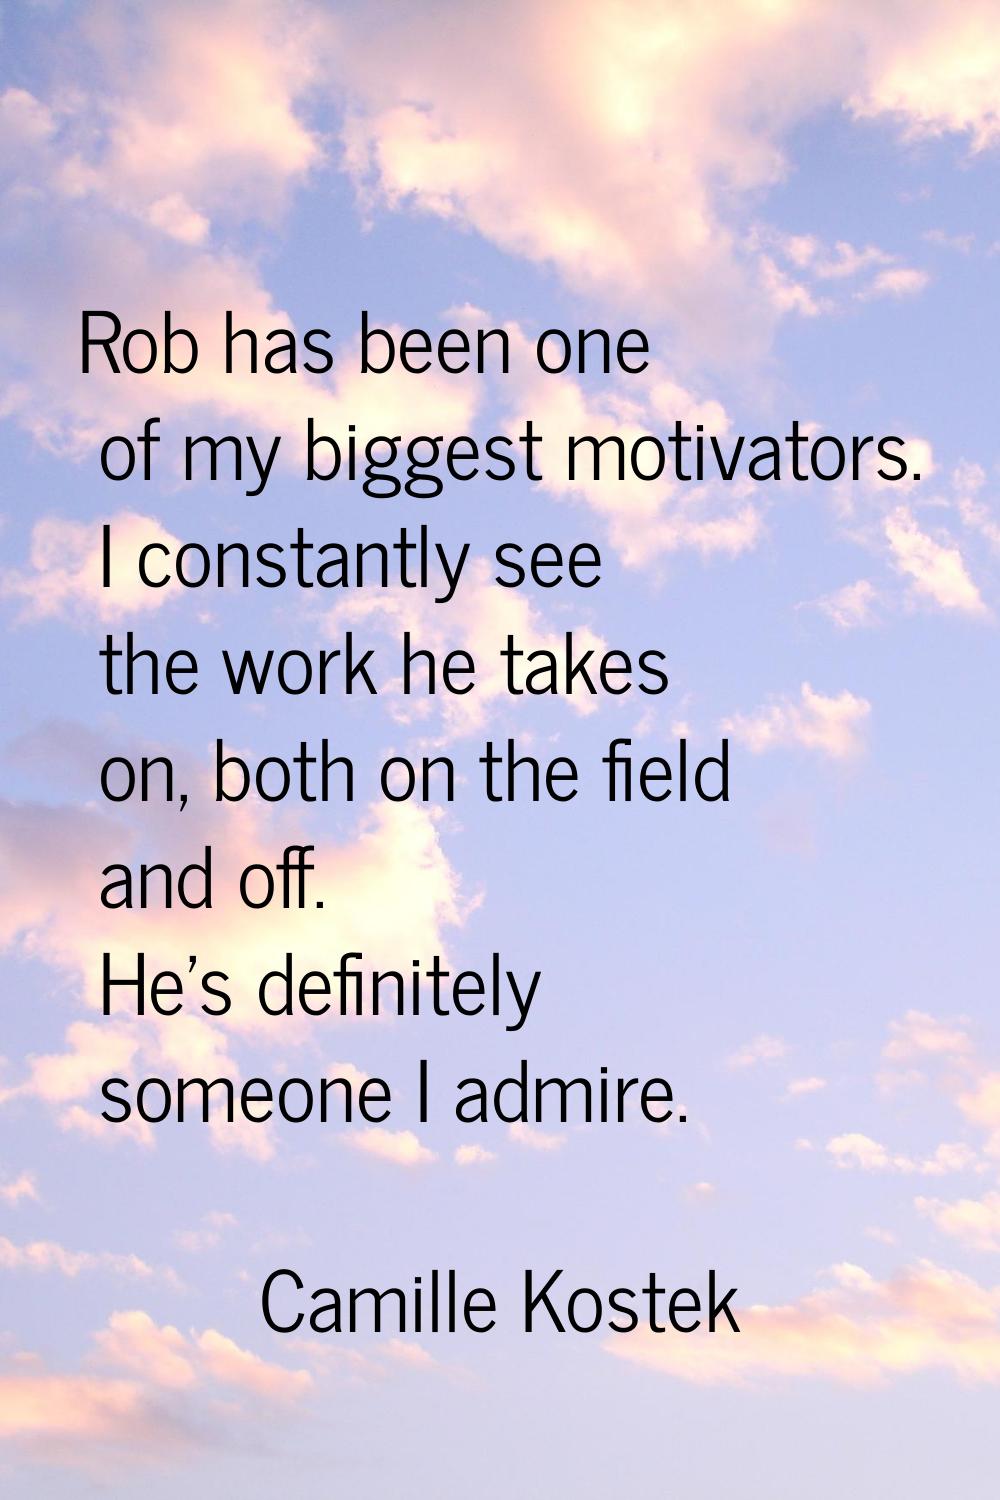 Rob has been one of my biggest motivators. I constantly see the work he takes on, both on the field